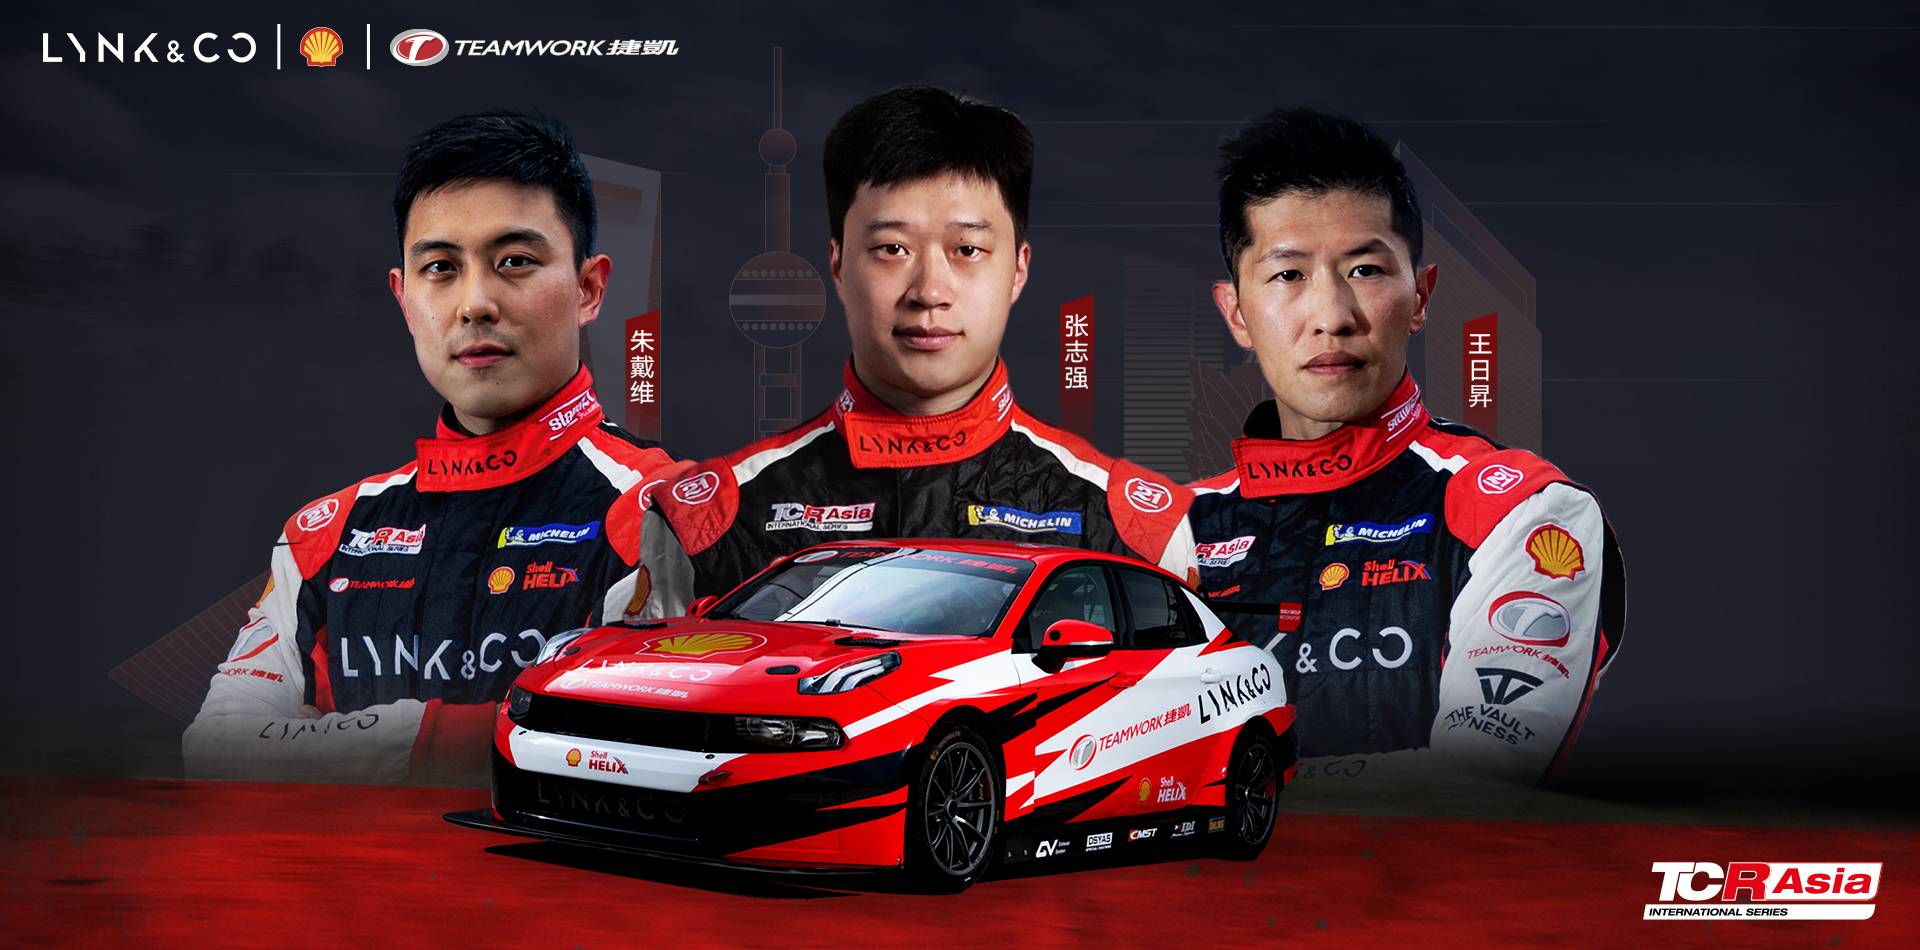 Read more about the article Shell Teamwork Lynk & Co Racing back for TCR Asia assault